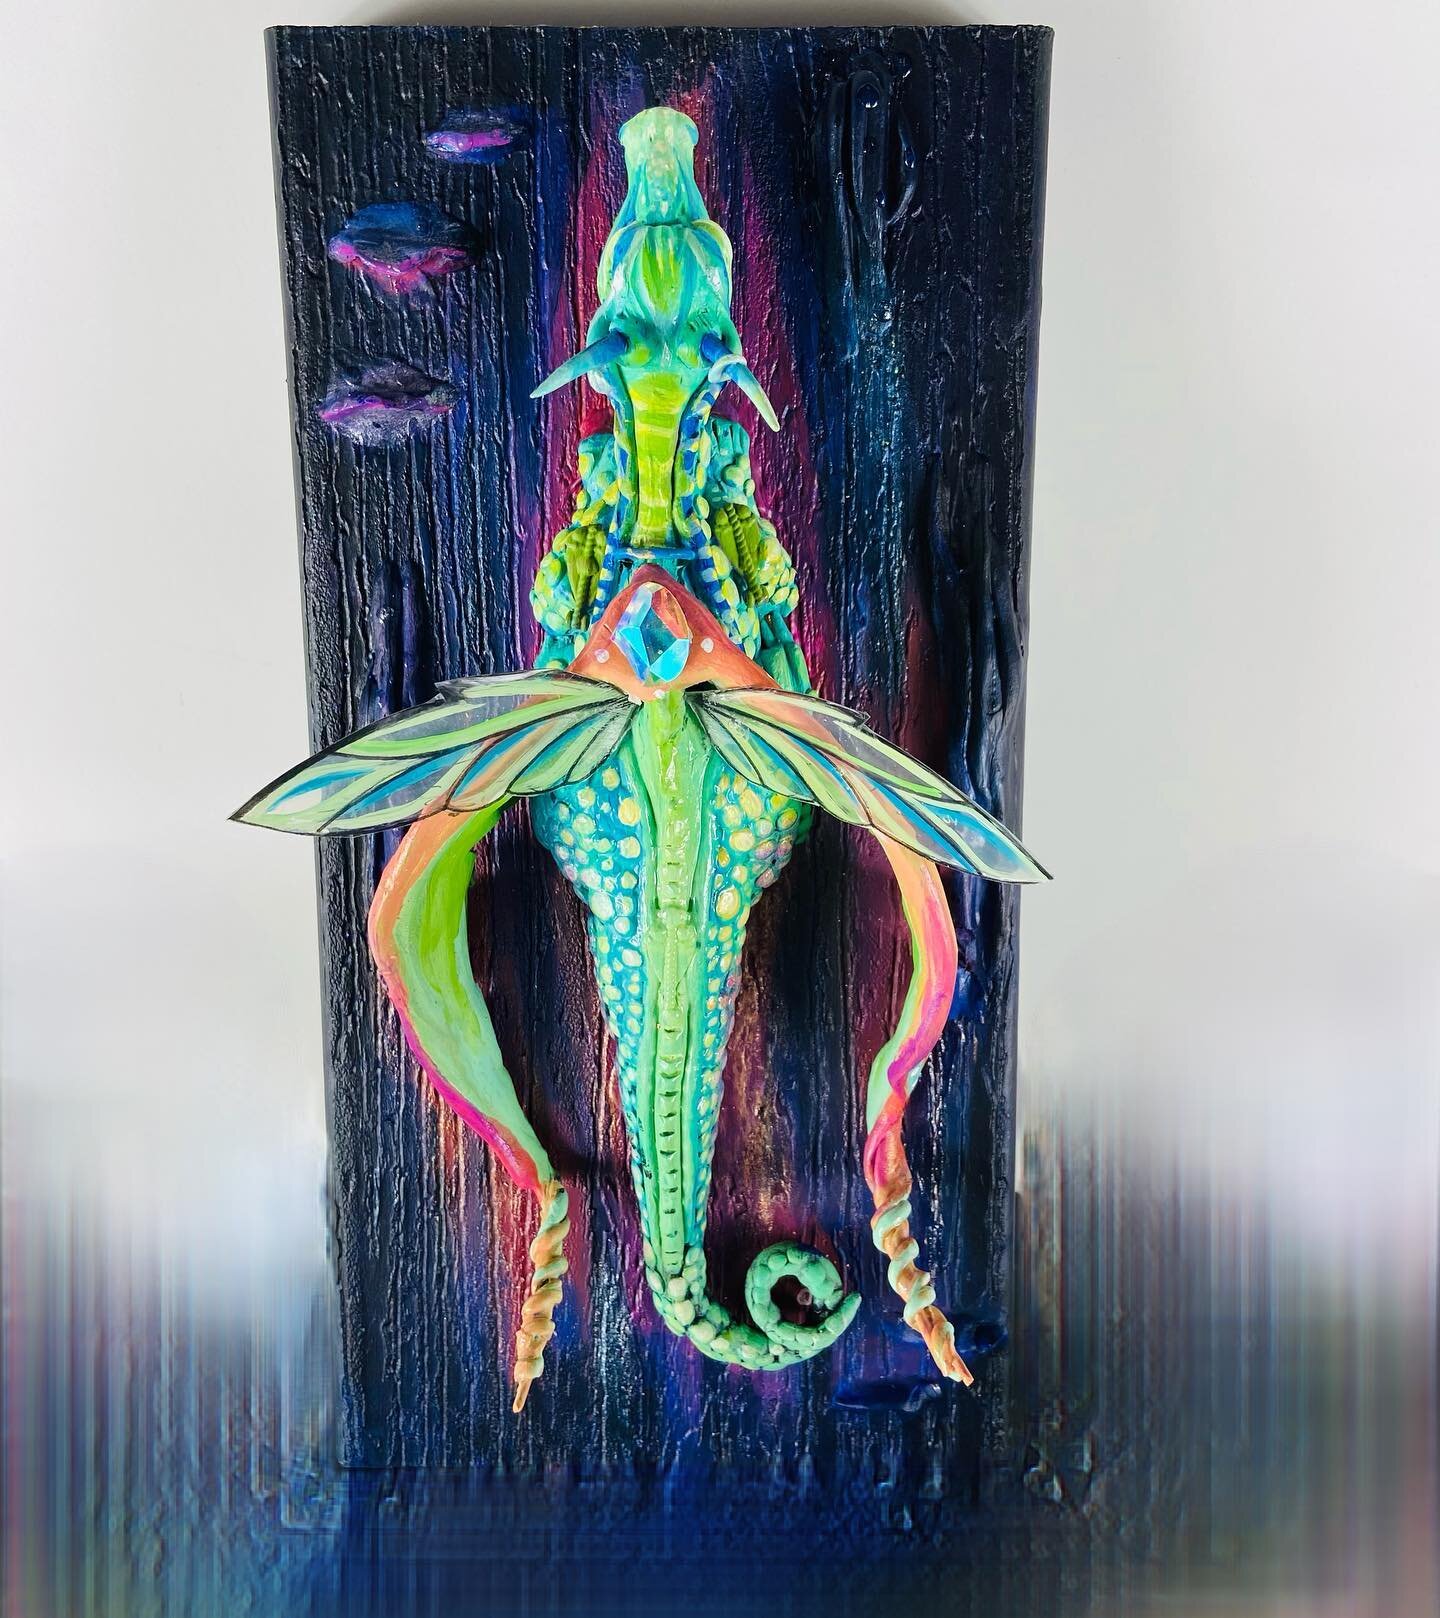 Night Light the Dragonfly 
&ldquo;When Gravity Fails&rdquo;
Polymer clay, paper clay, Gems, glitter, magic, acrylic paint 
*Sold*
.
Swipe&gt;&gt;&gt; for more details 
.
.
#dragons #night #magic #ohioartists #creaturedesign #erikakatherine_art #moonl